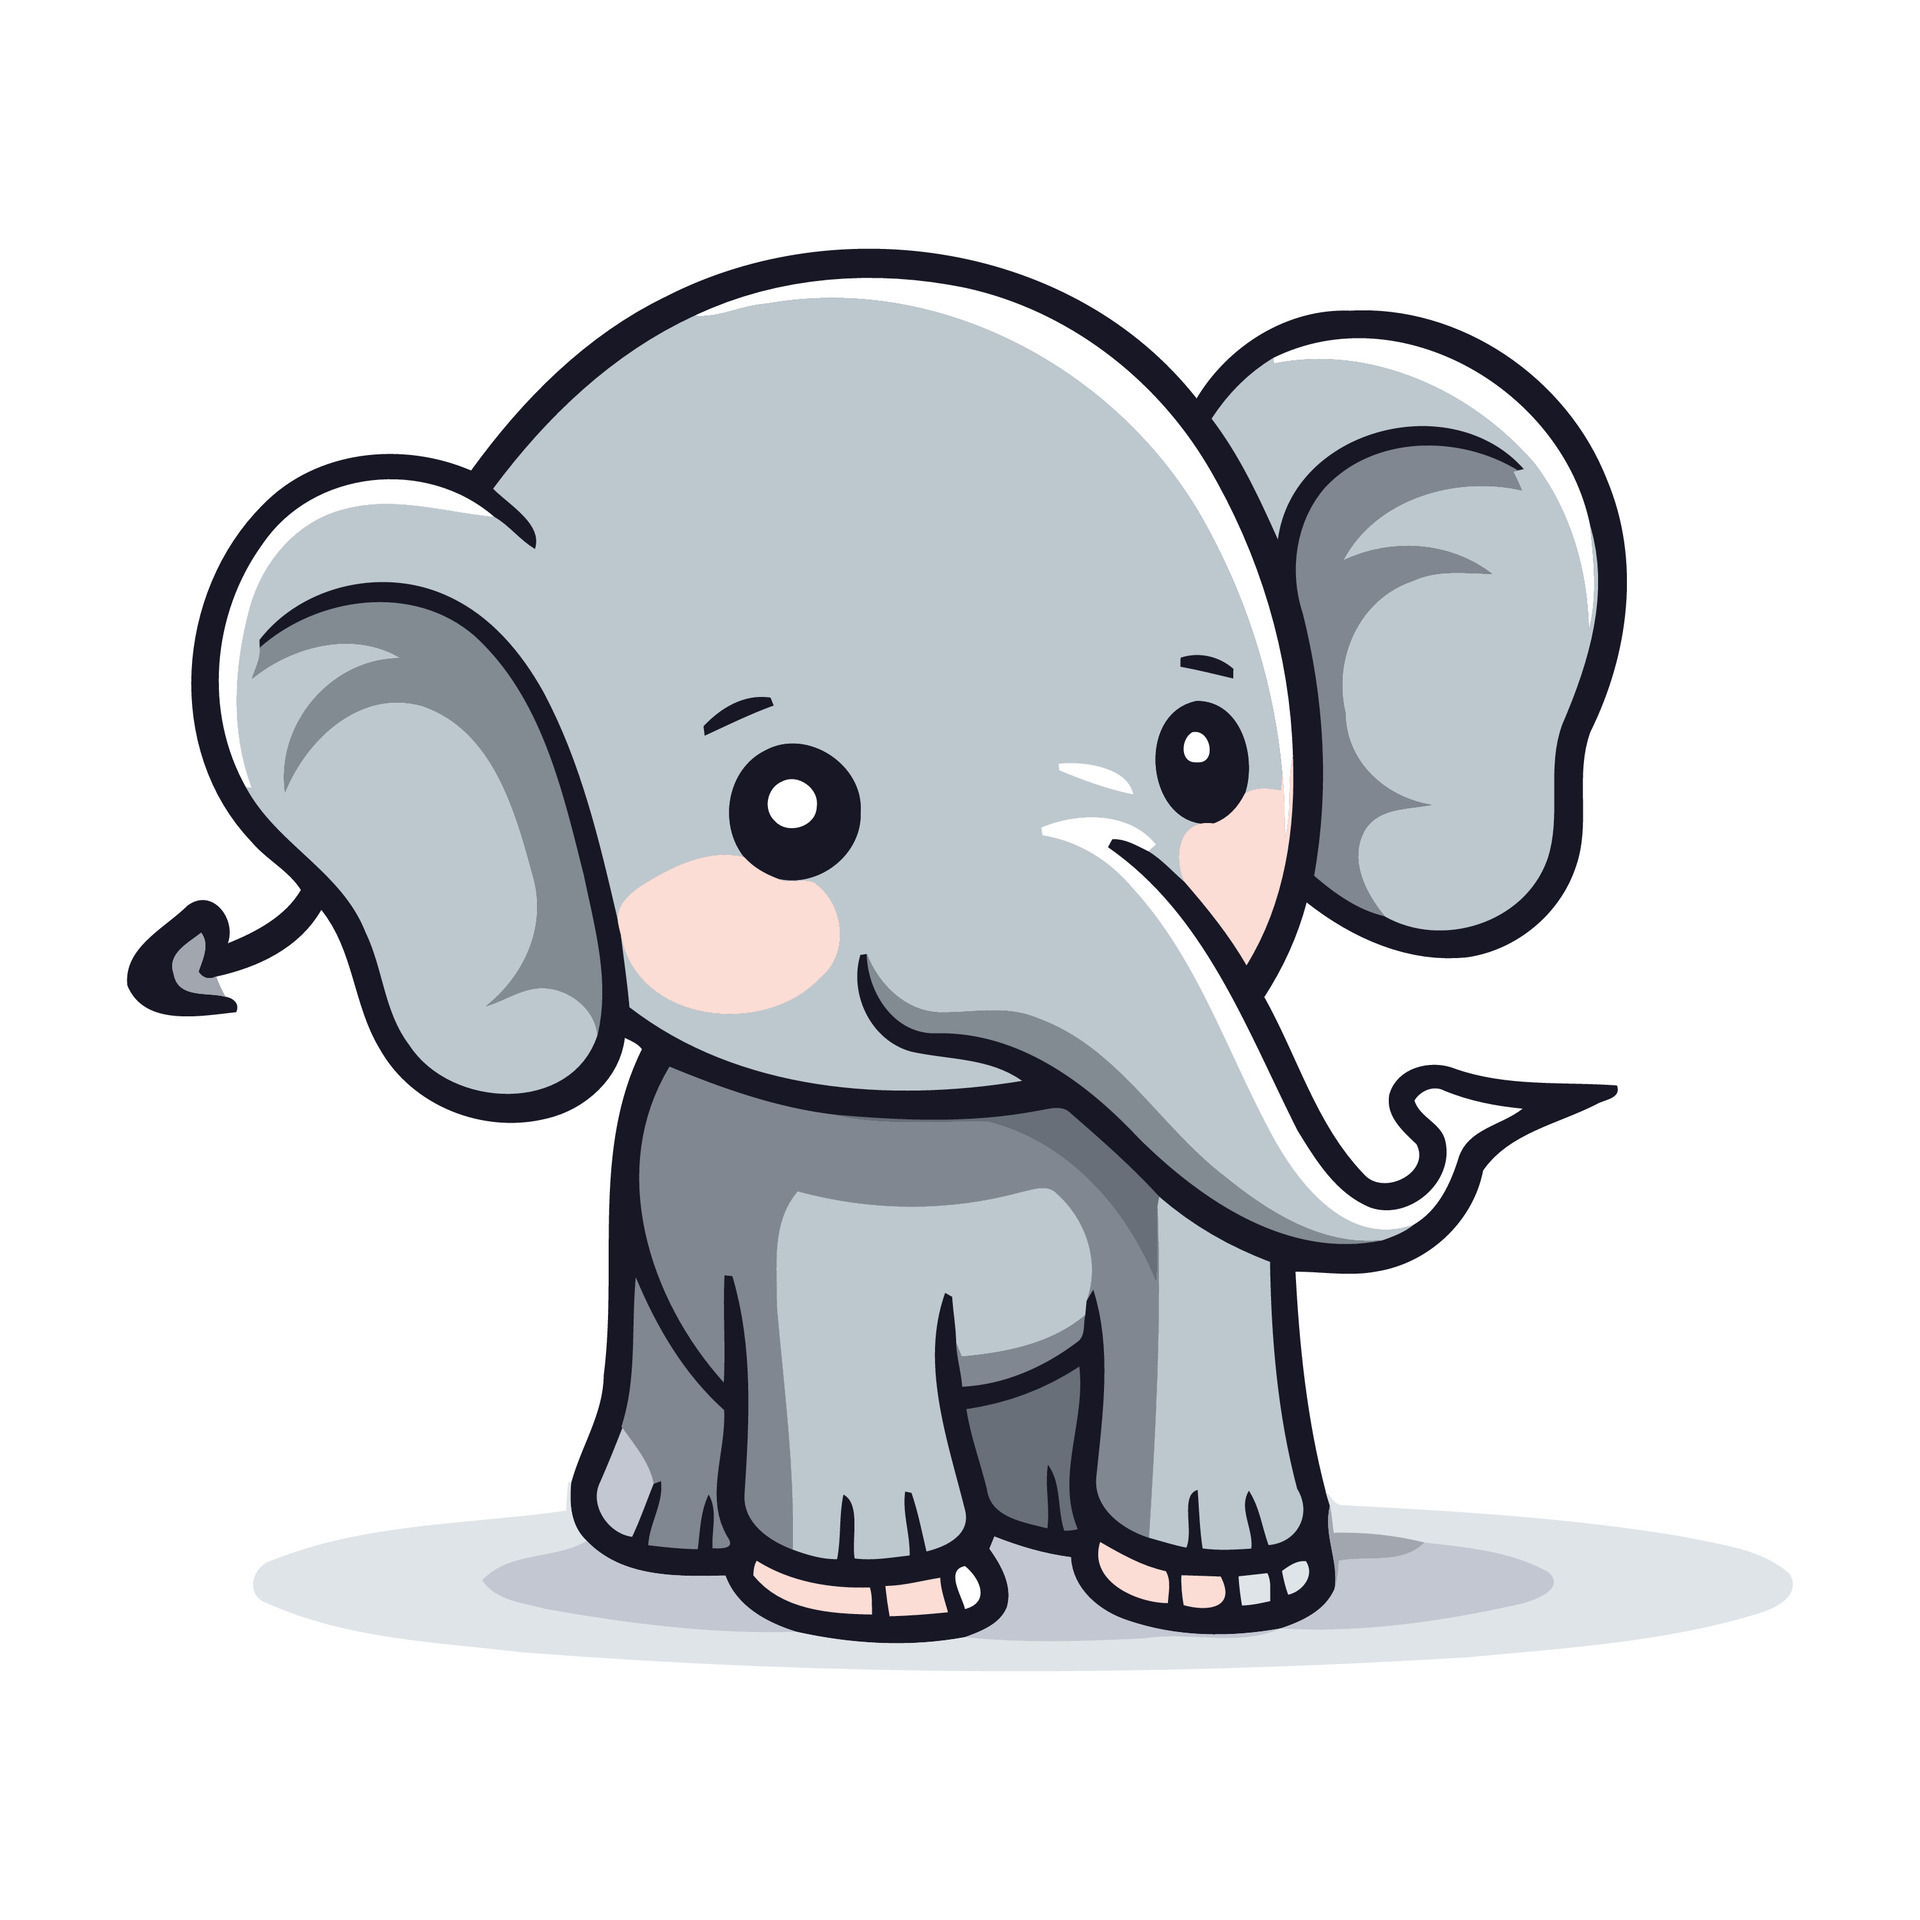 https://static.vecteezy.com/system/resources/previews/033/242/708/original/elephant-cartoon-design-animal-zoo-life-nature-character-childhood-and-adorable-theme-illustration-vector.jpg